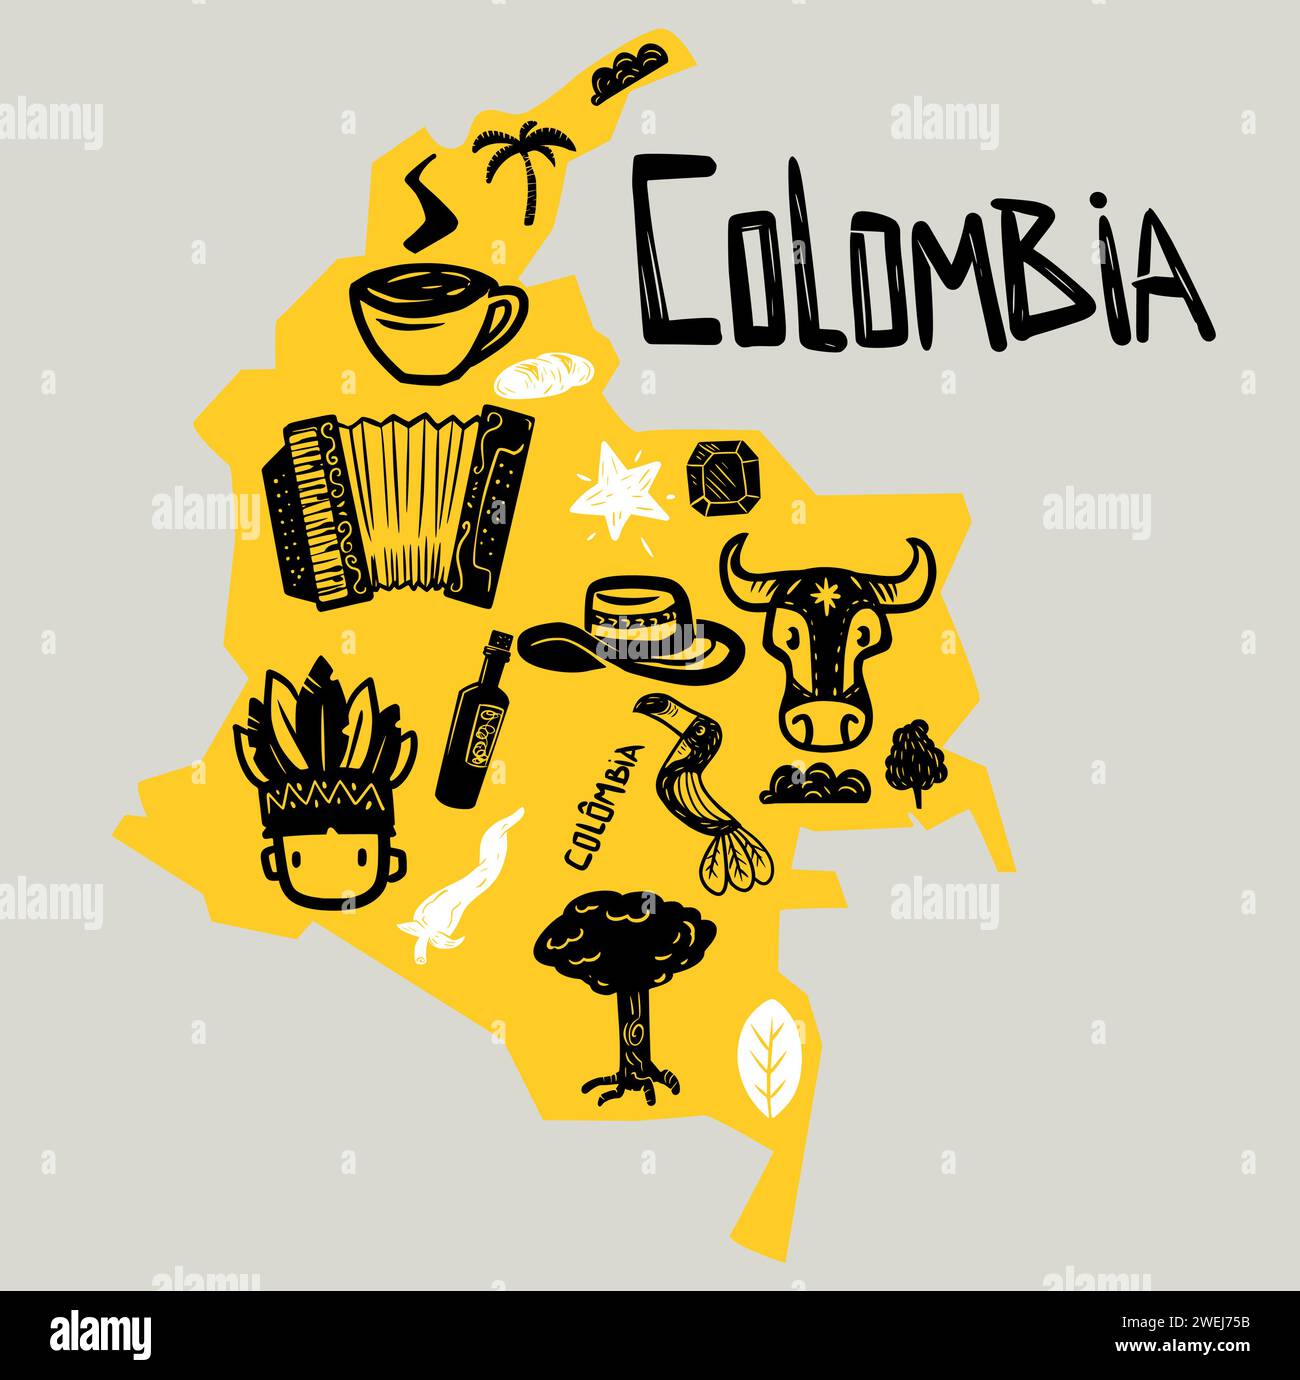 Colombia vectorial stylized map Stock Vector